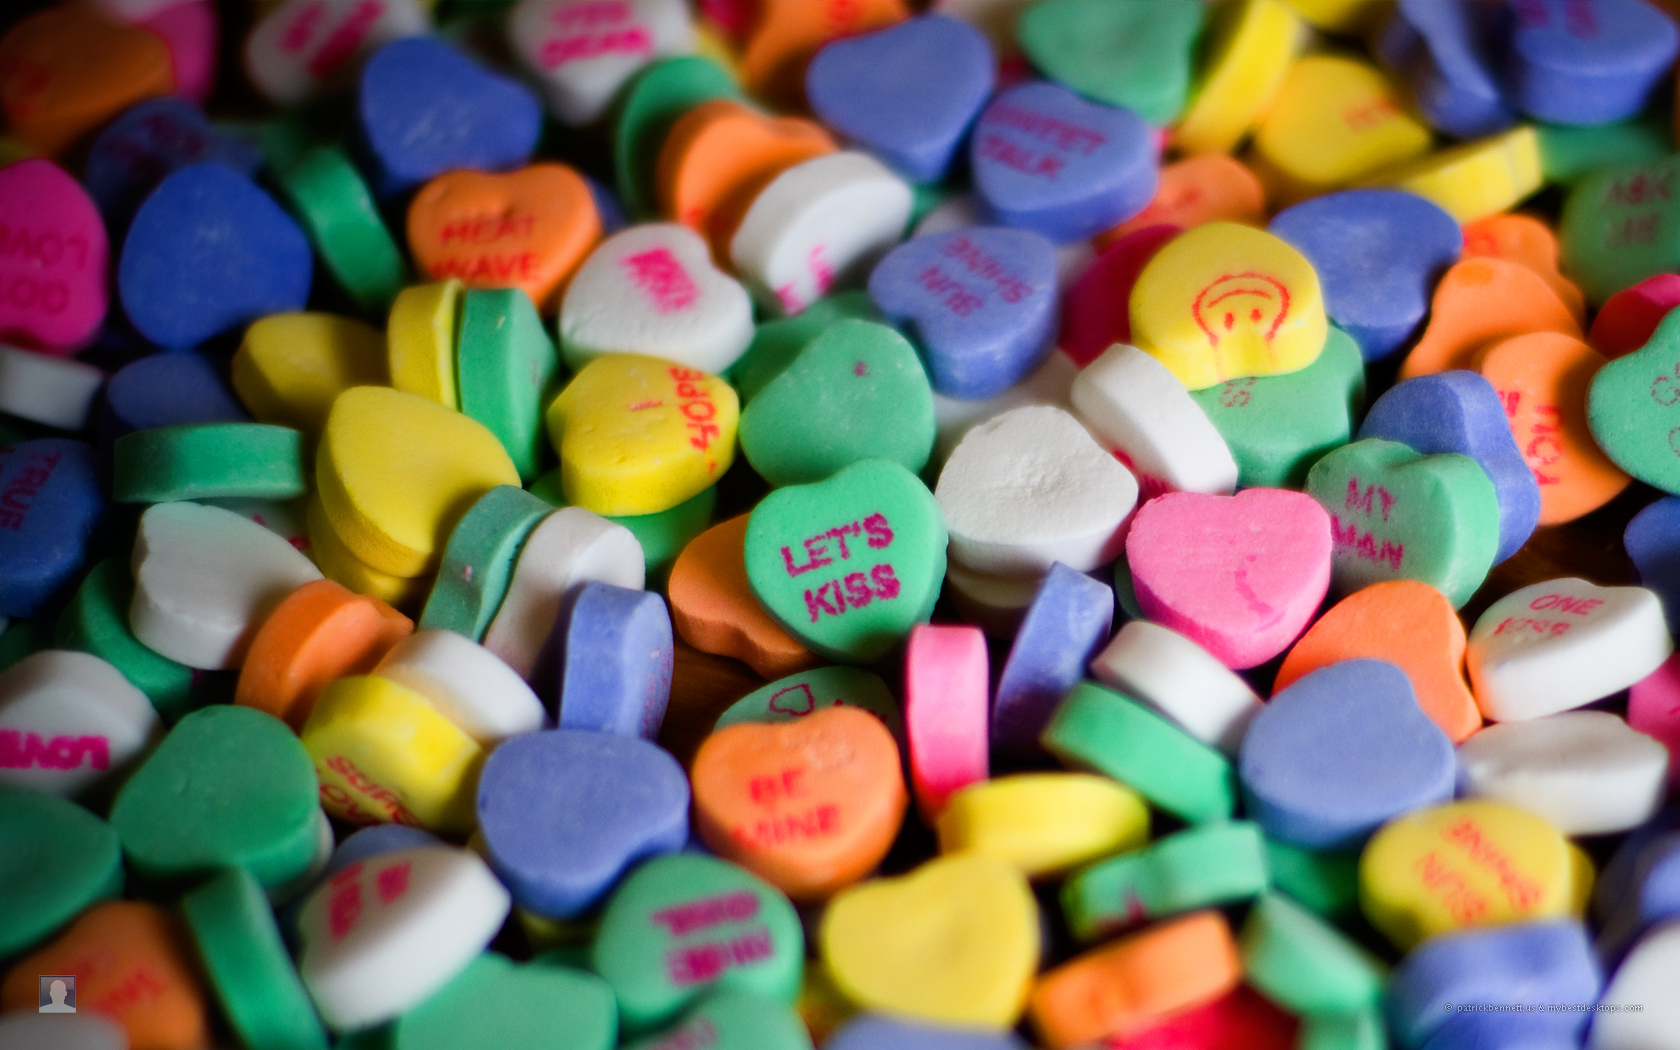 Related Post "Valentines Heart Candy Background Images Free"